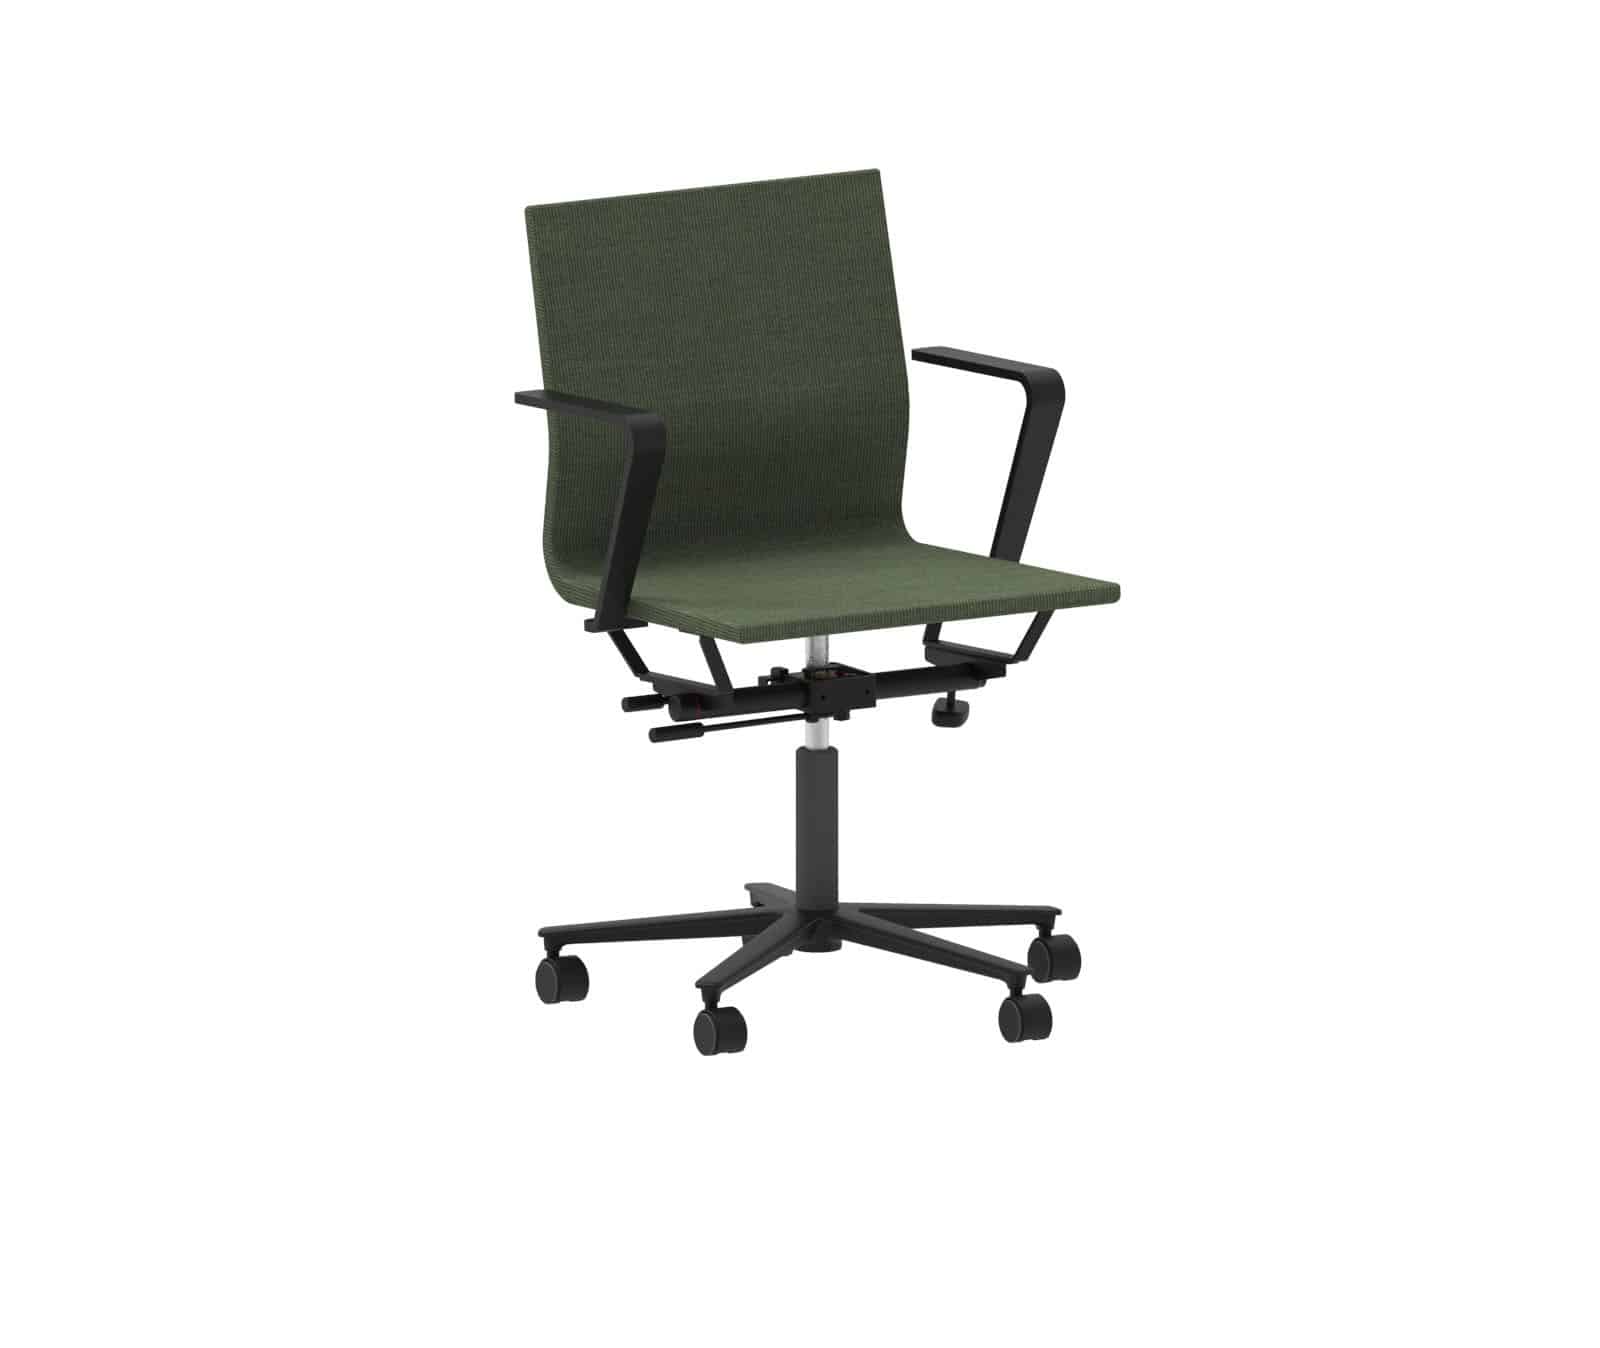 office chair with armrests and on wheels open plan office